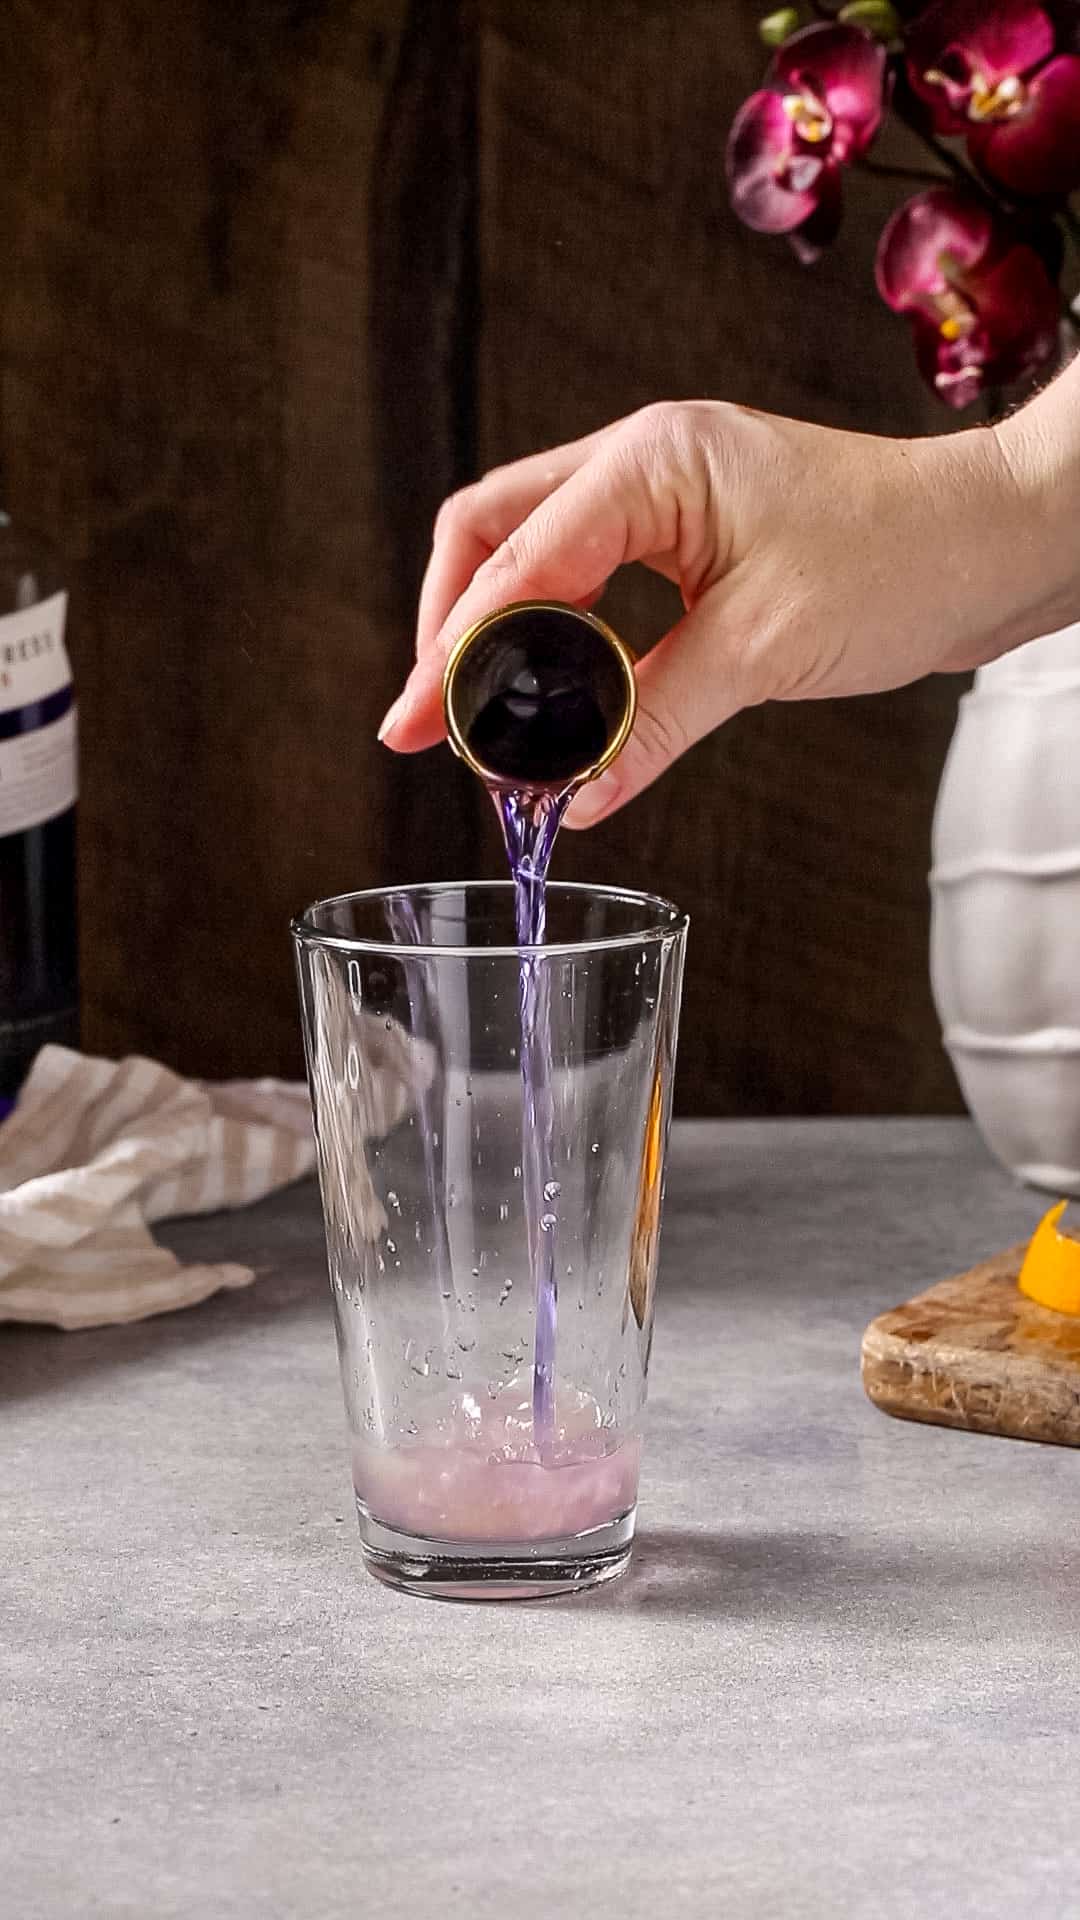 Gin being added to the cocktail shaker glass.